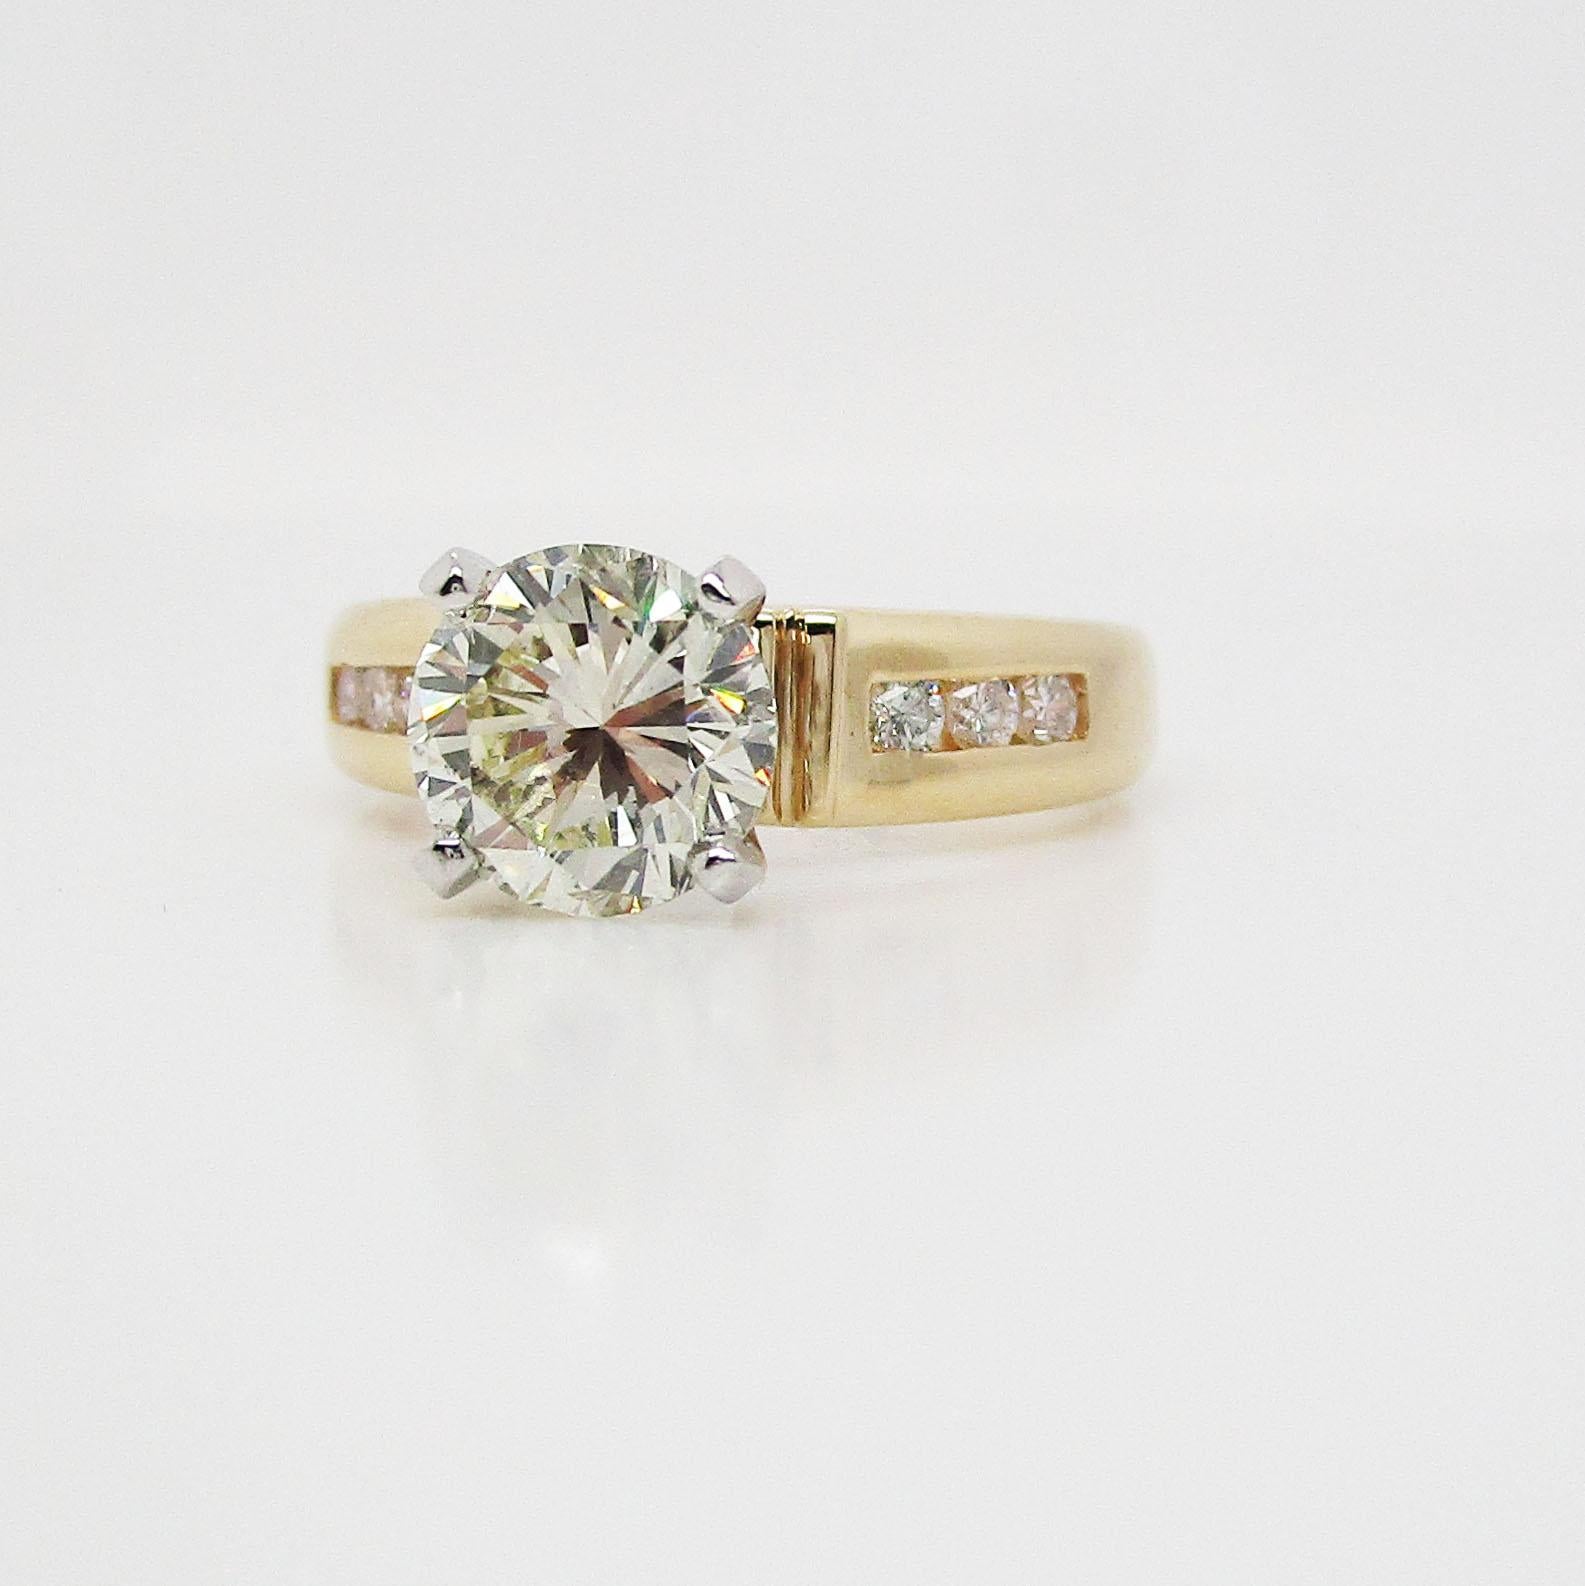 This is an absolutely stunning diamond engagement ring in 14k yellow gold with a breathtaking diamond center stone! This is a truly gorgeous diamond in a beautiful, traditional mounting. The center stone is flanked on either side by three delicate